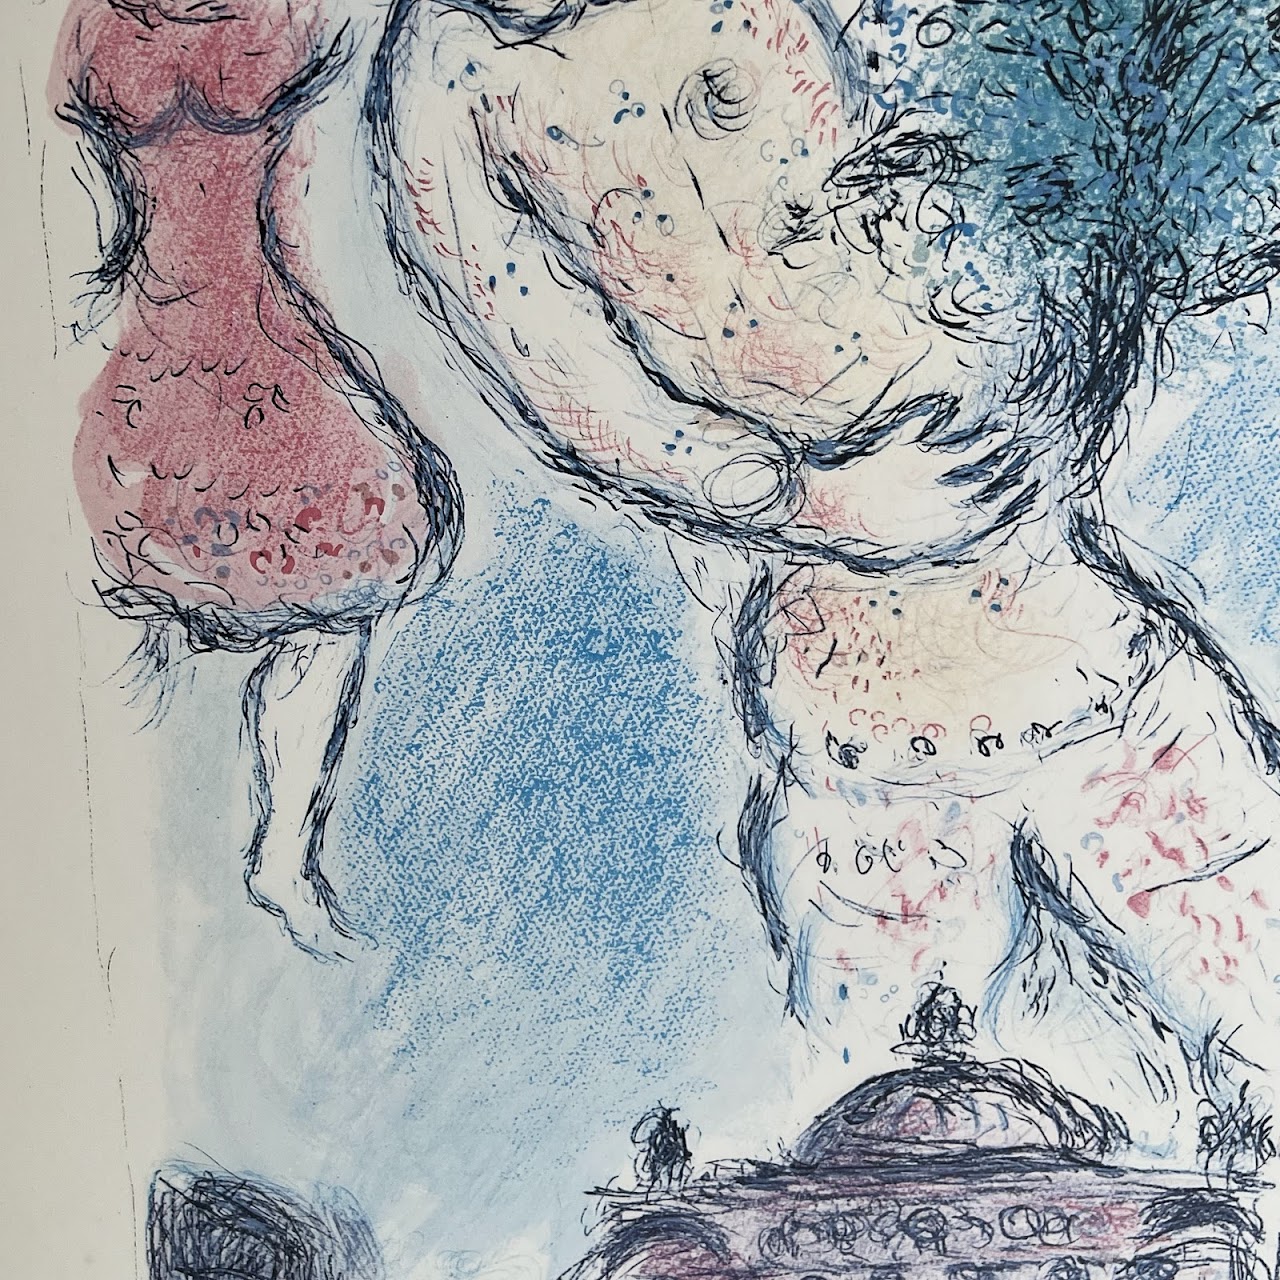 Marc Chagall Galerie Maeght 'Lithographies Originales Récentes' 1981 Exhibition Poster